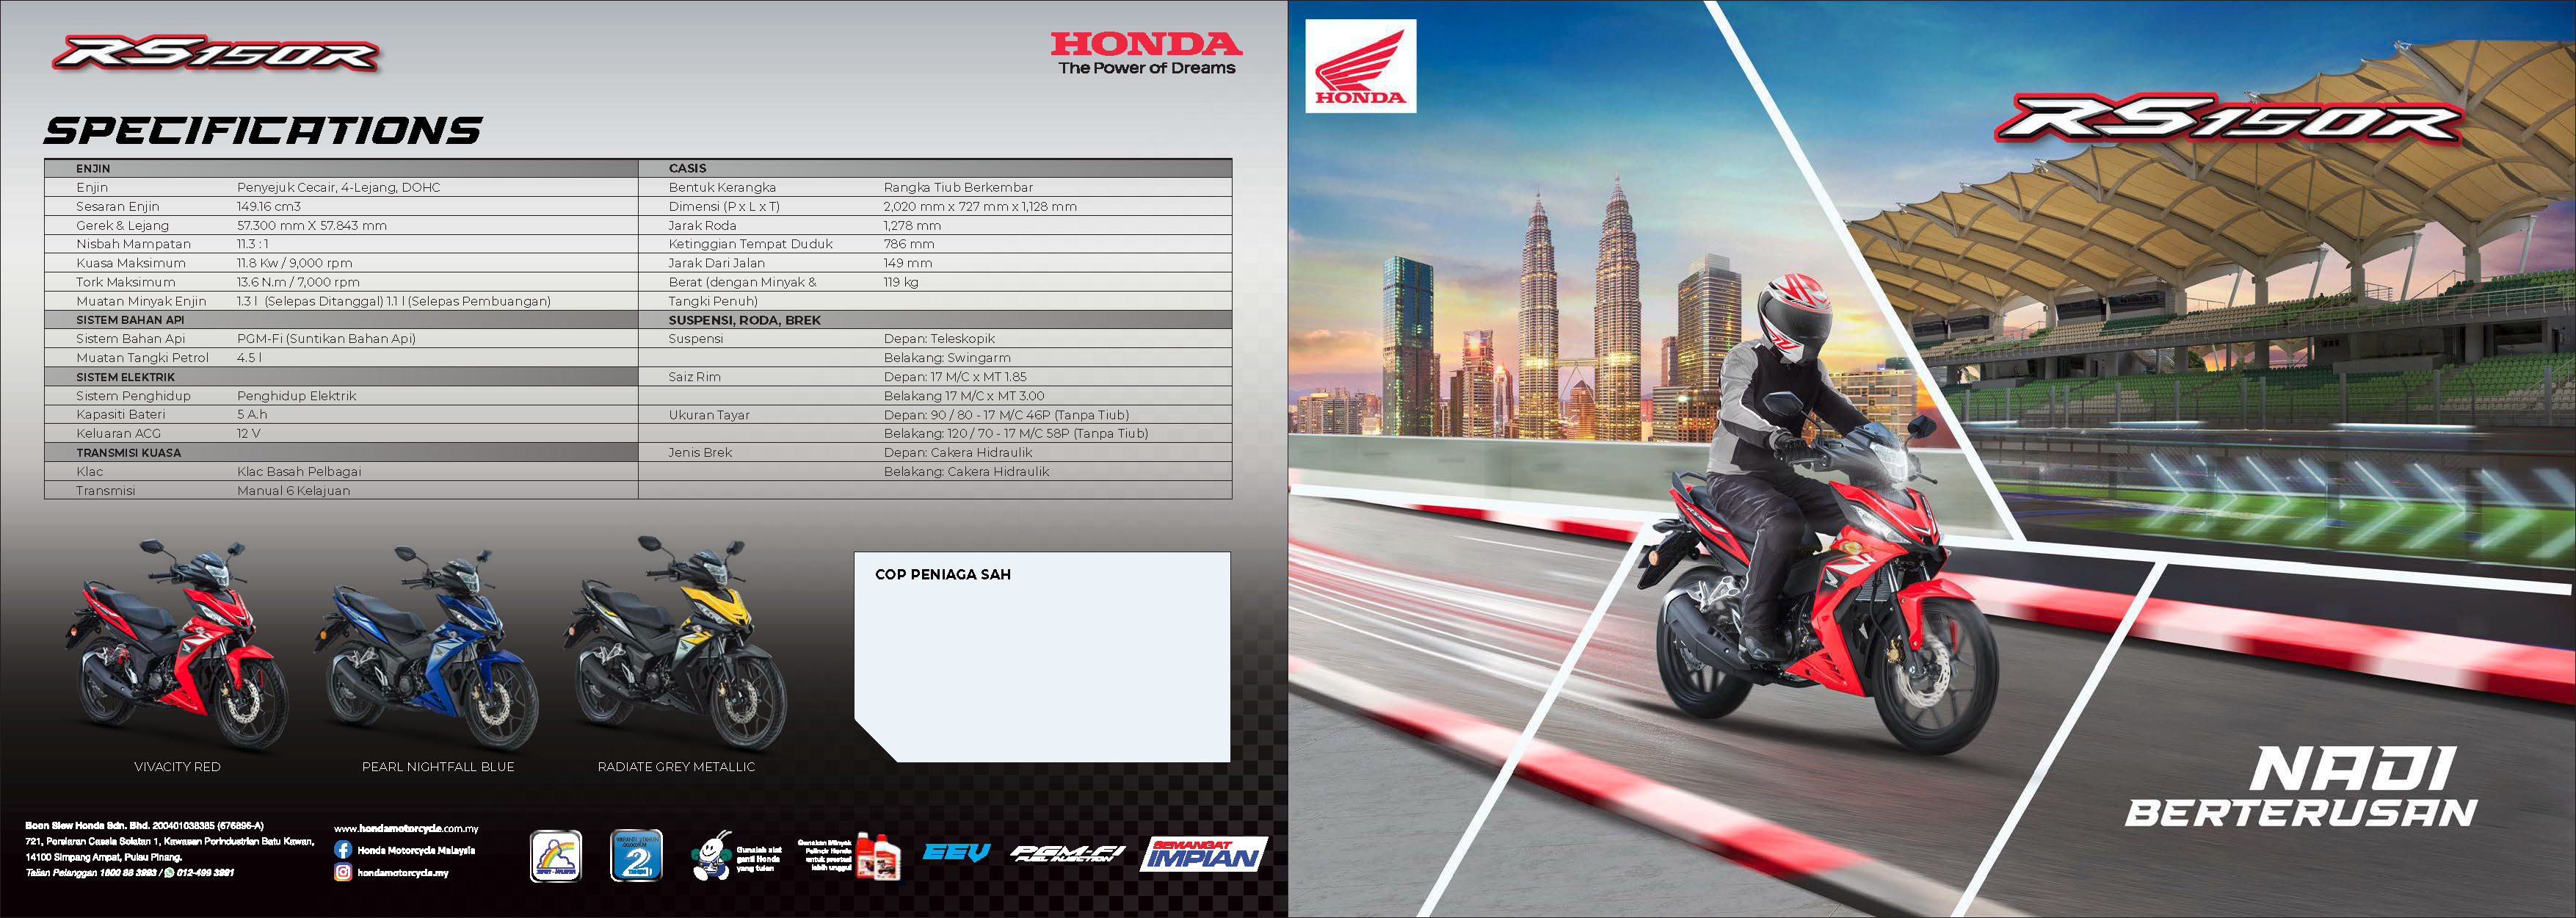 HONDA-RS150R-e-Brochure-compressed_Page_1.png